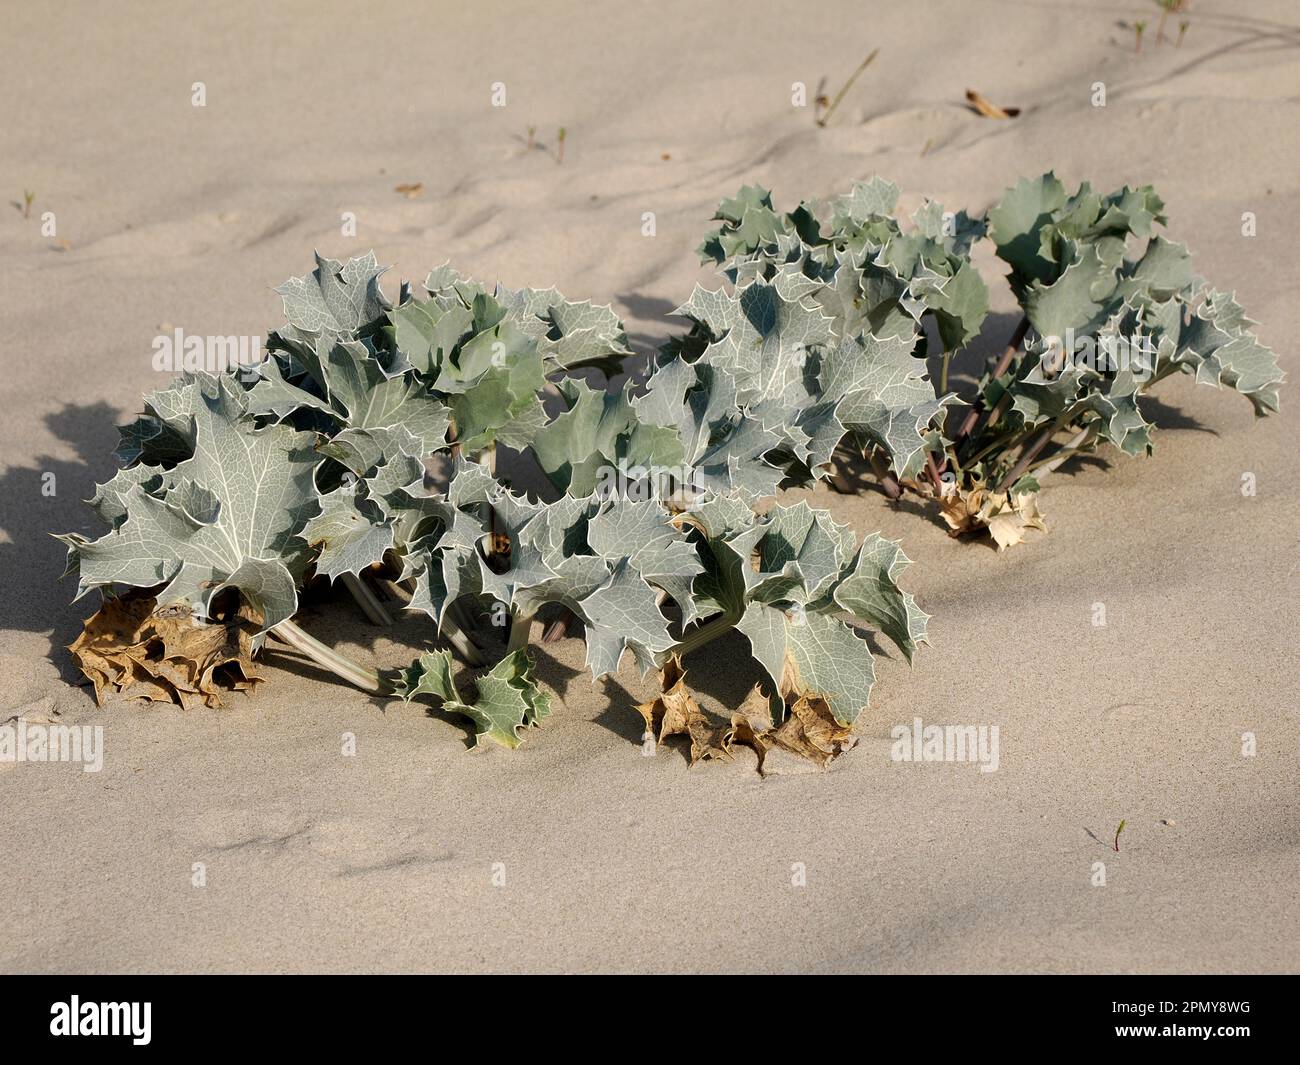 Crambe maritima or seakale in the dunes at Berck of the baie de Somme in France Stock Photo